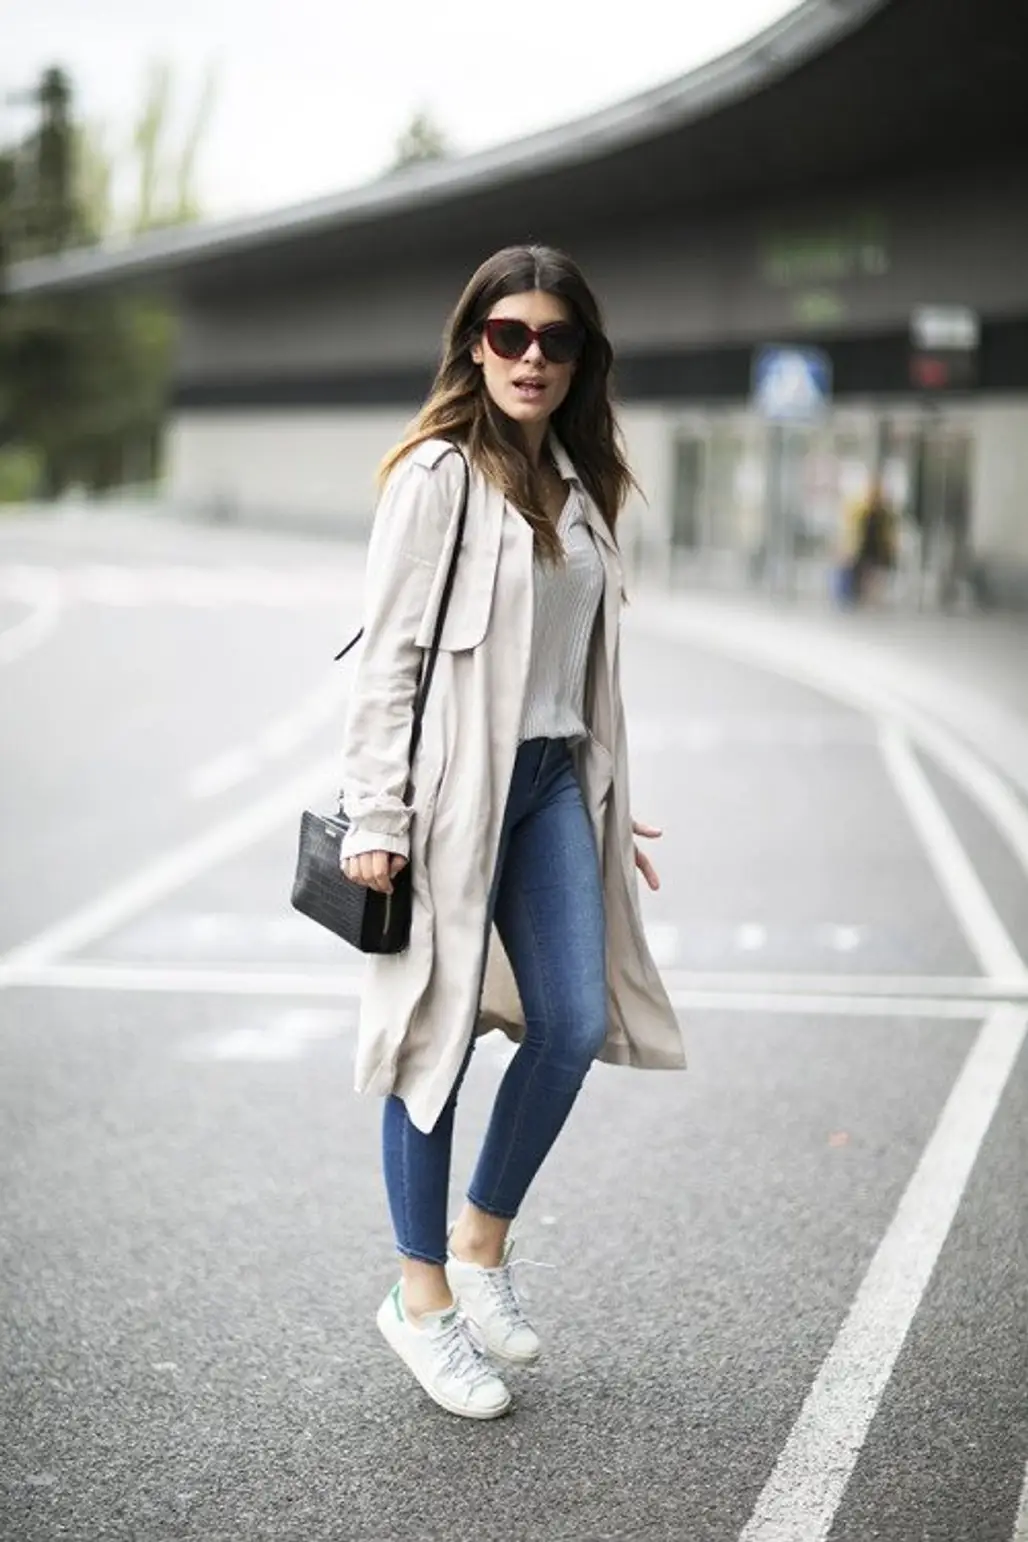 Smart Casuals: Ankle Length Jeans and Long Coat